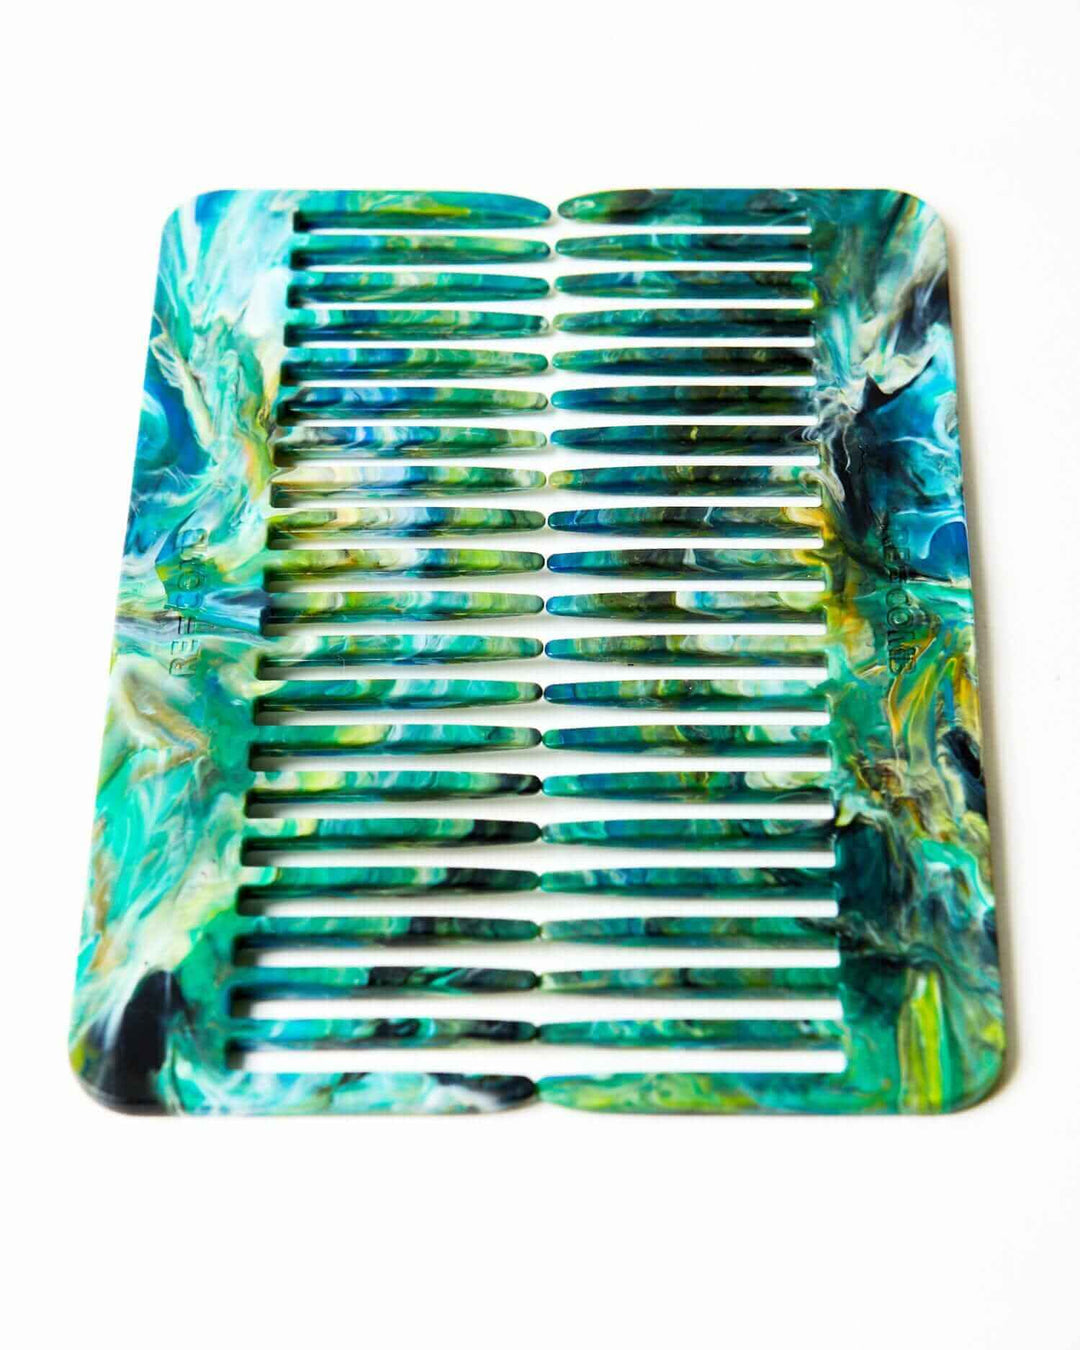 Sustainable re=comb beautiful designed hair combs